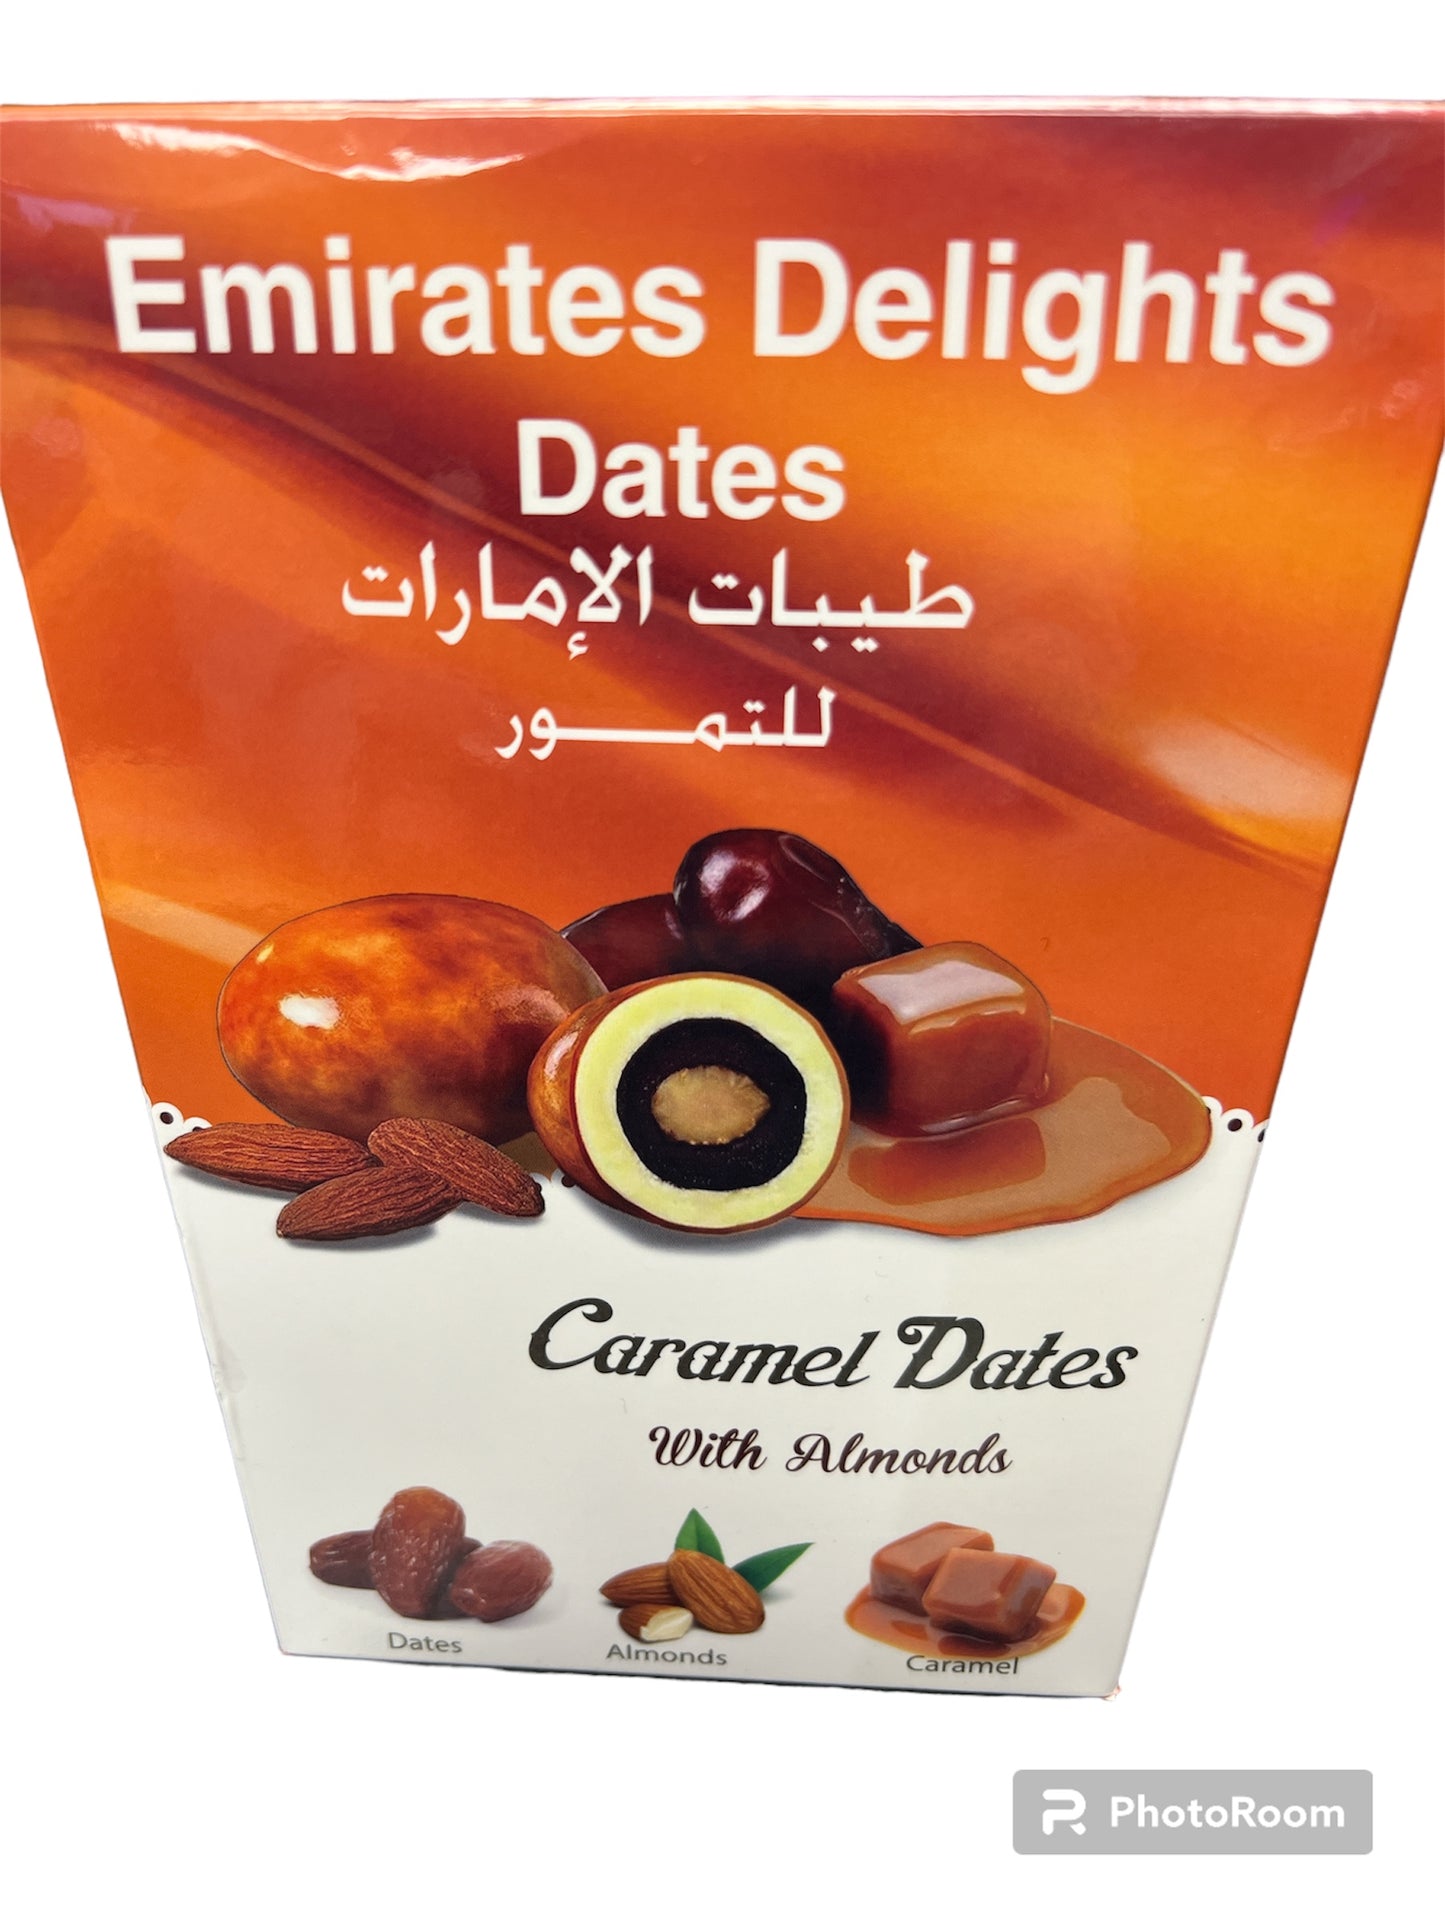 Caramel dates with almonds